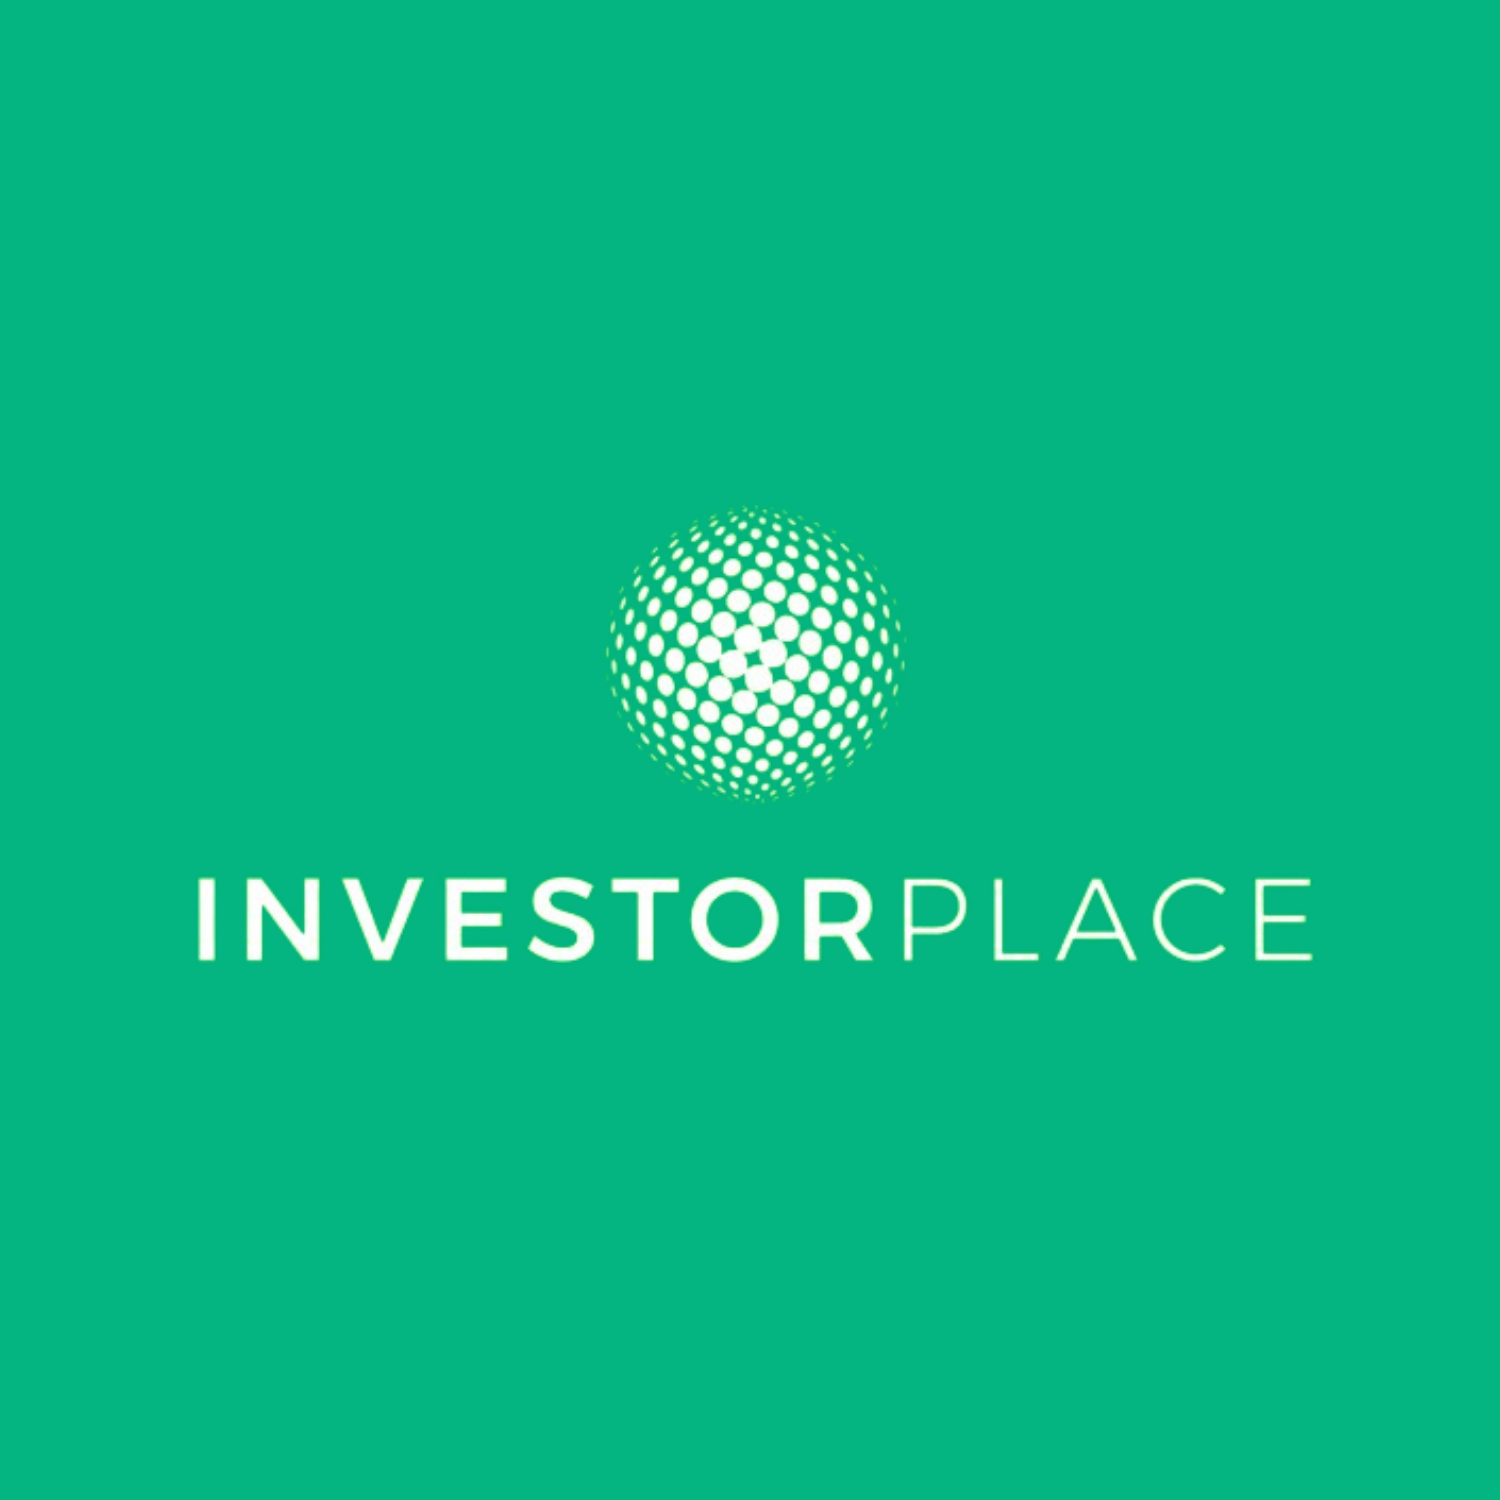 INVESTOR PLACE